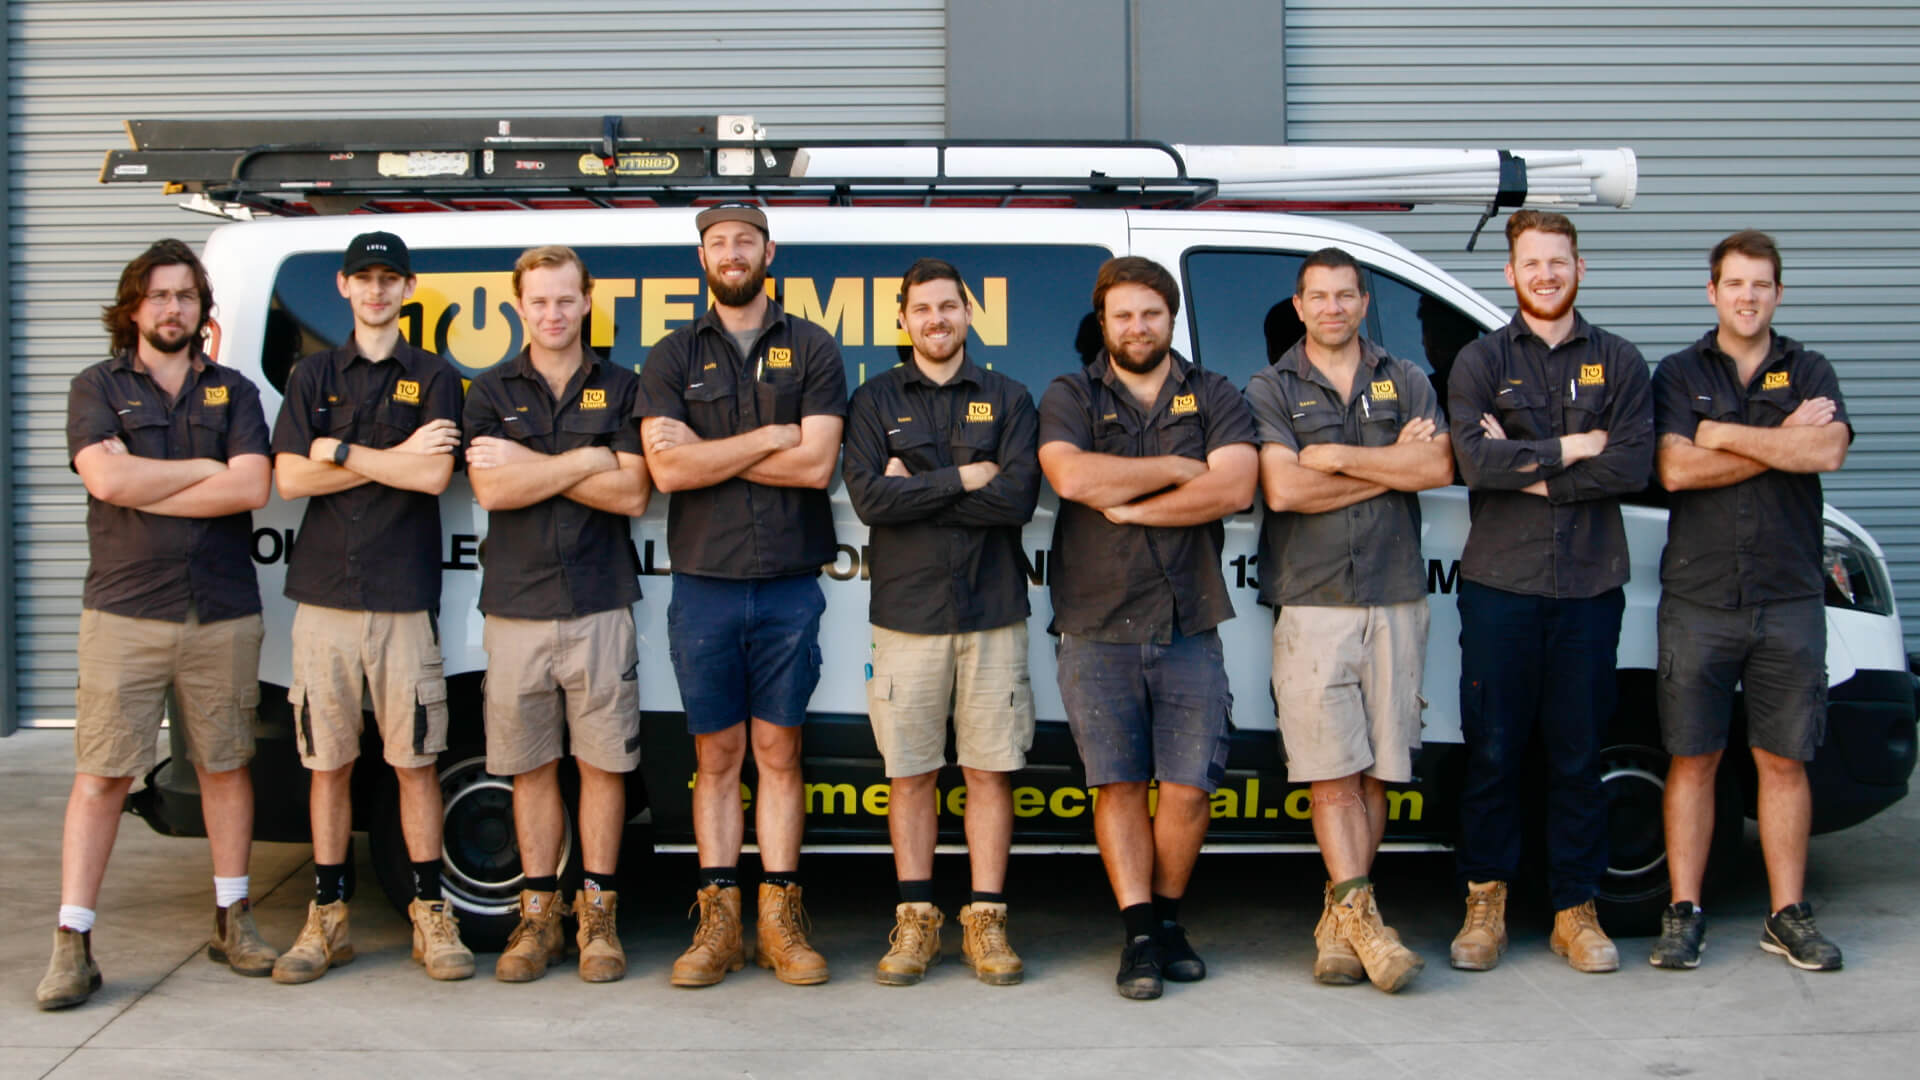 The team of Coolum electricians standing in front of the working van.